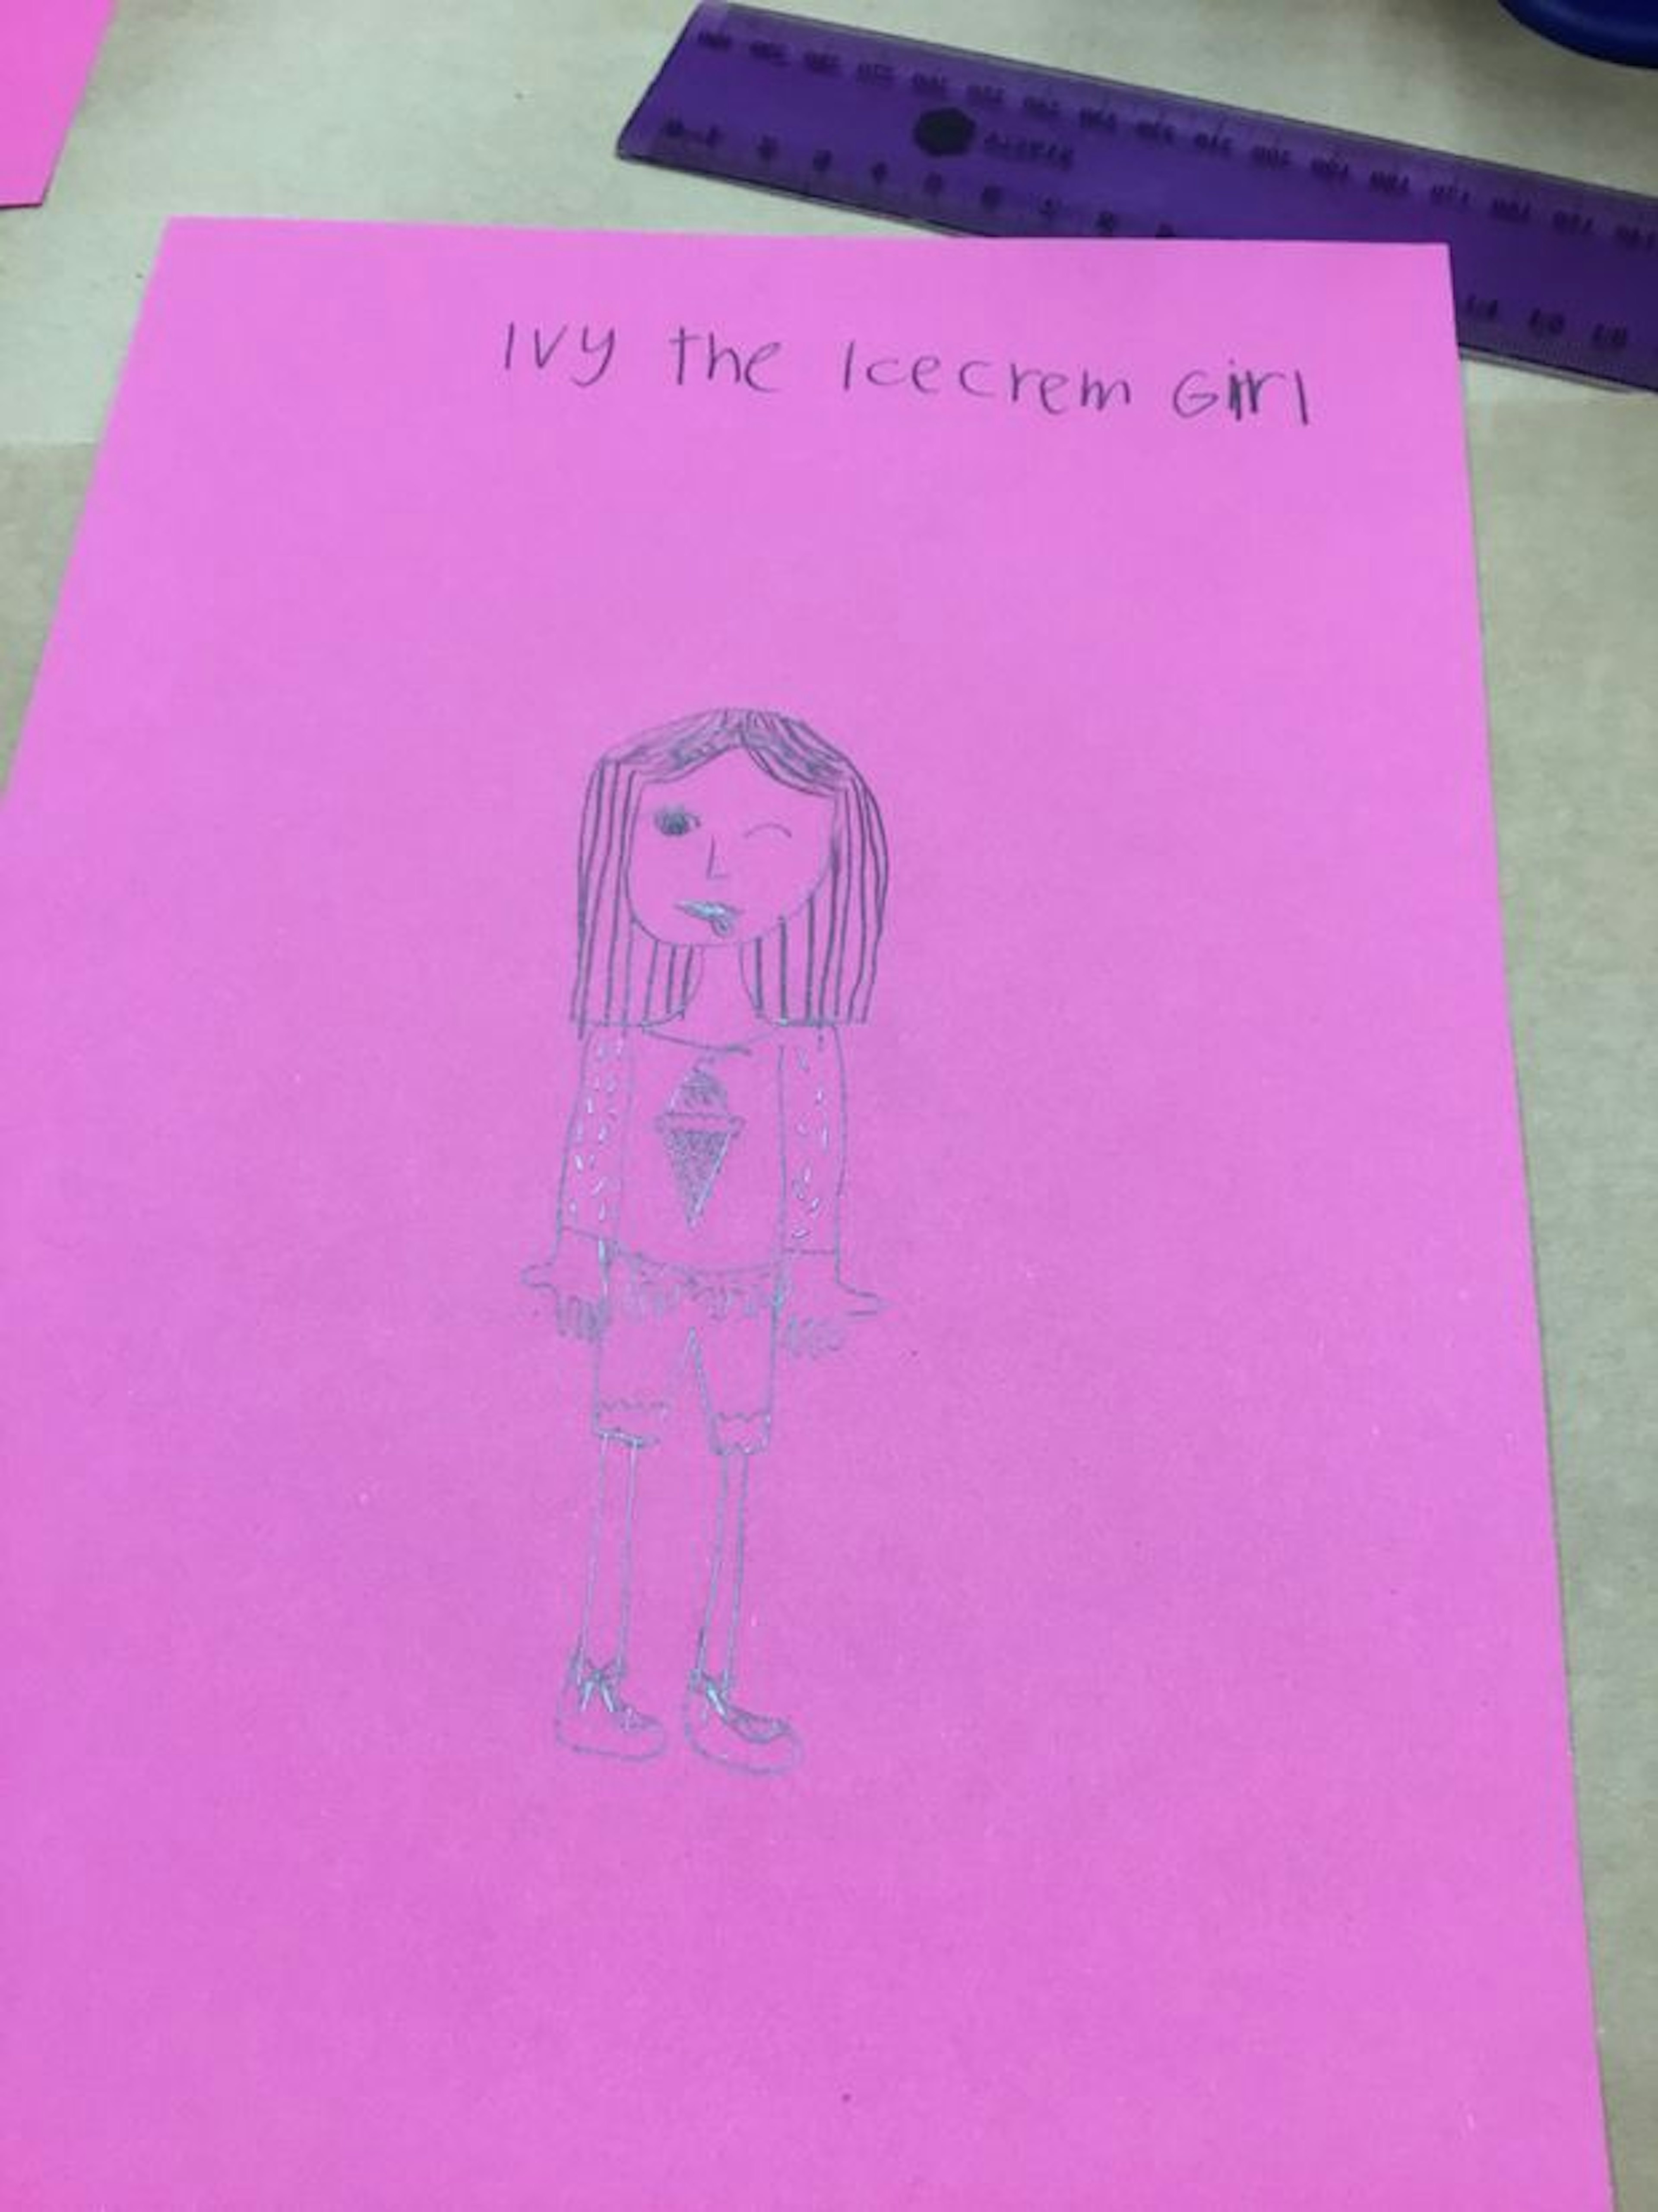 We drew a girl and names her ivy the ice cream girl because it is themed by ice-cream